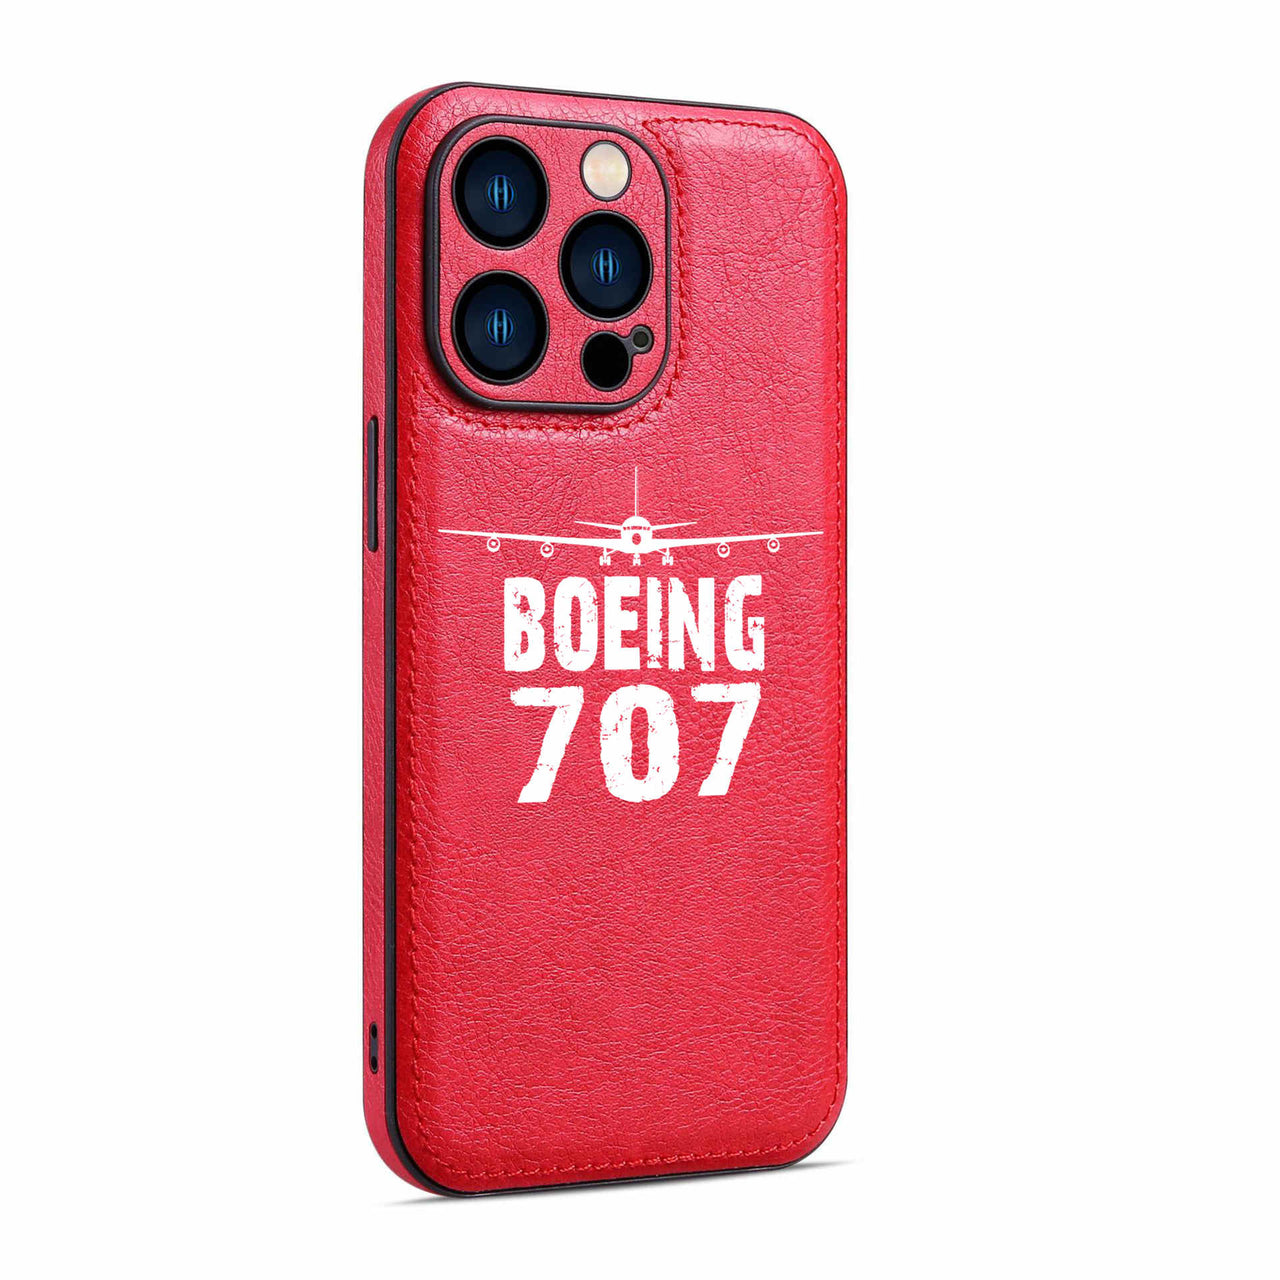 Boeing 707 & Plane Designed Leather iPhone Cases